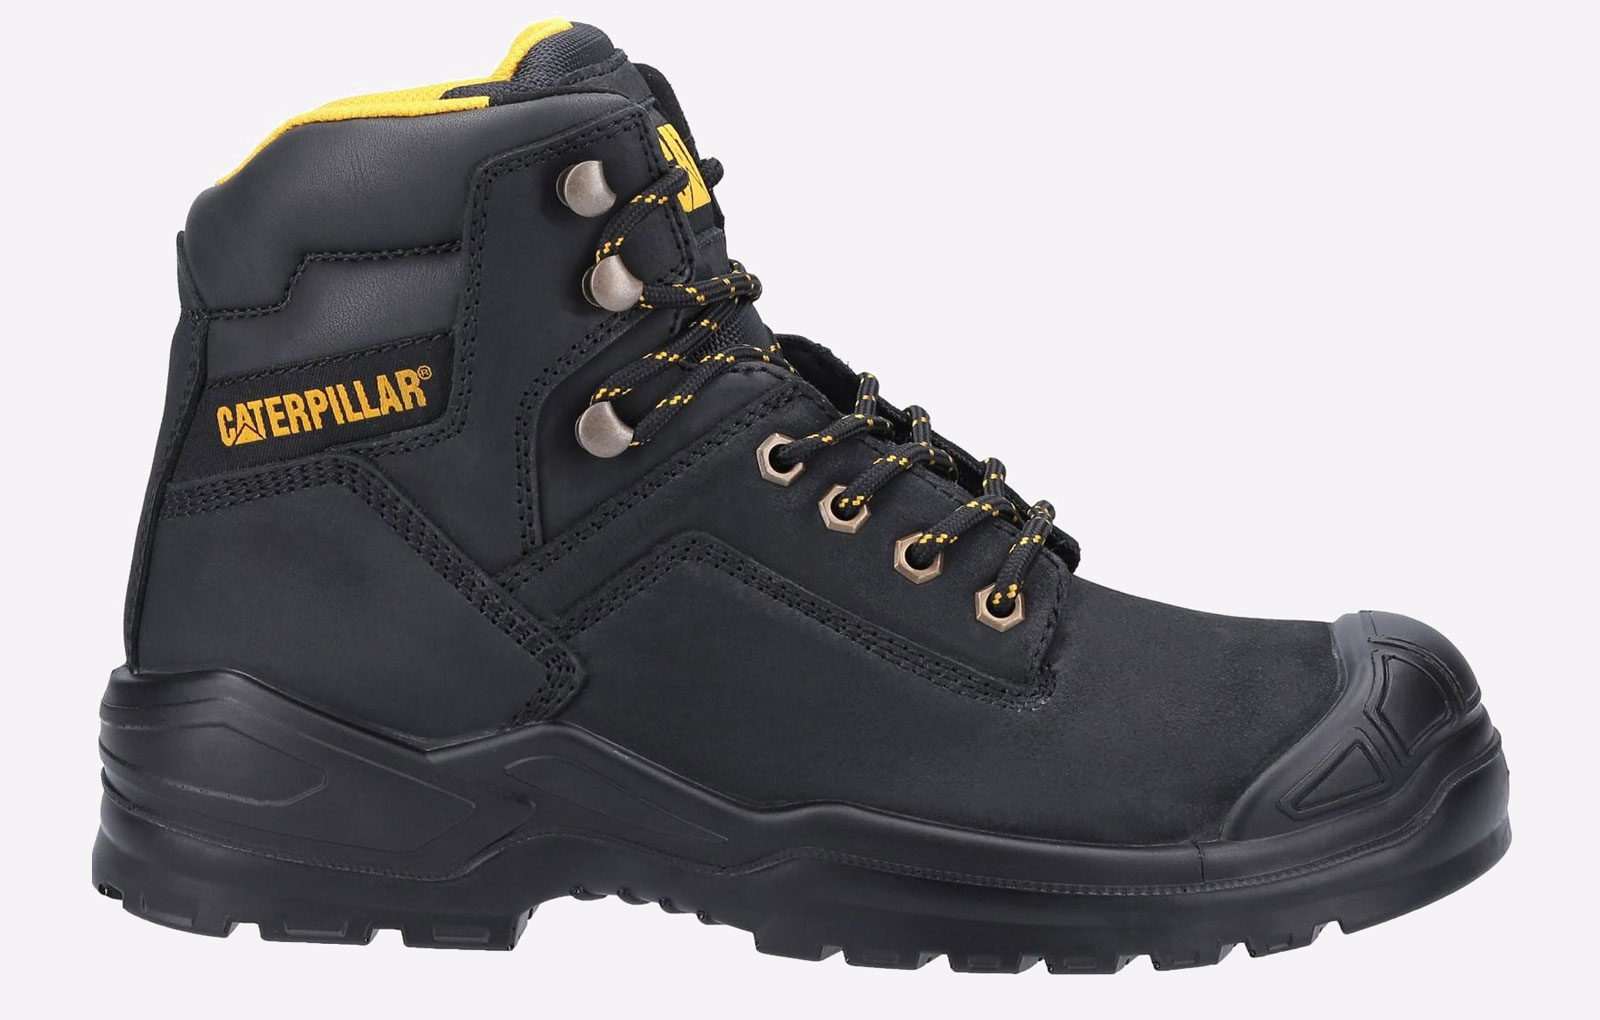 Caterpillar Striver S3 Leather Safety Boots Mens - GRD-31900-54612-03